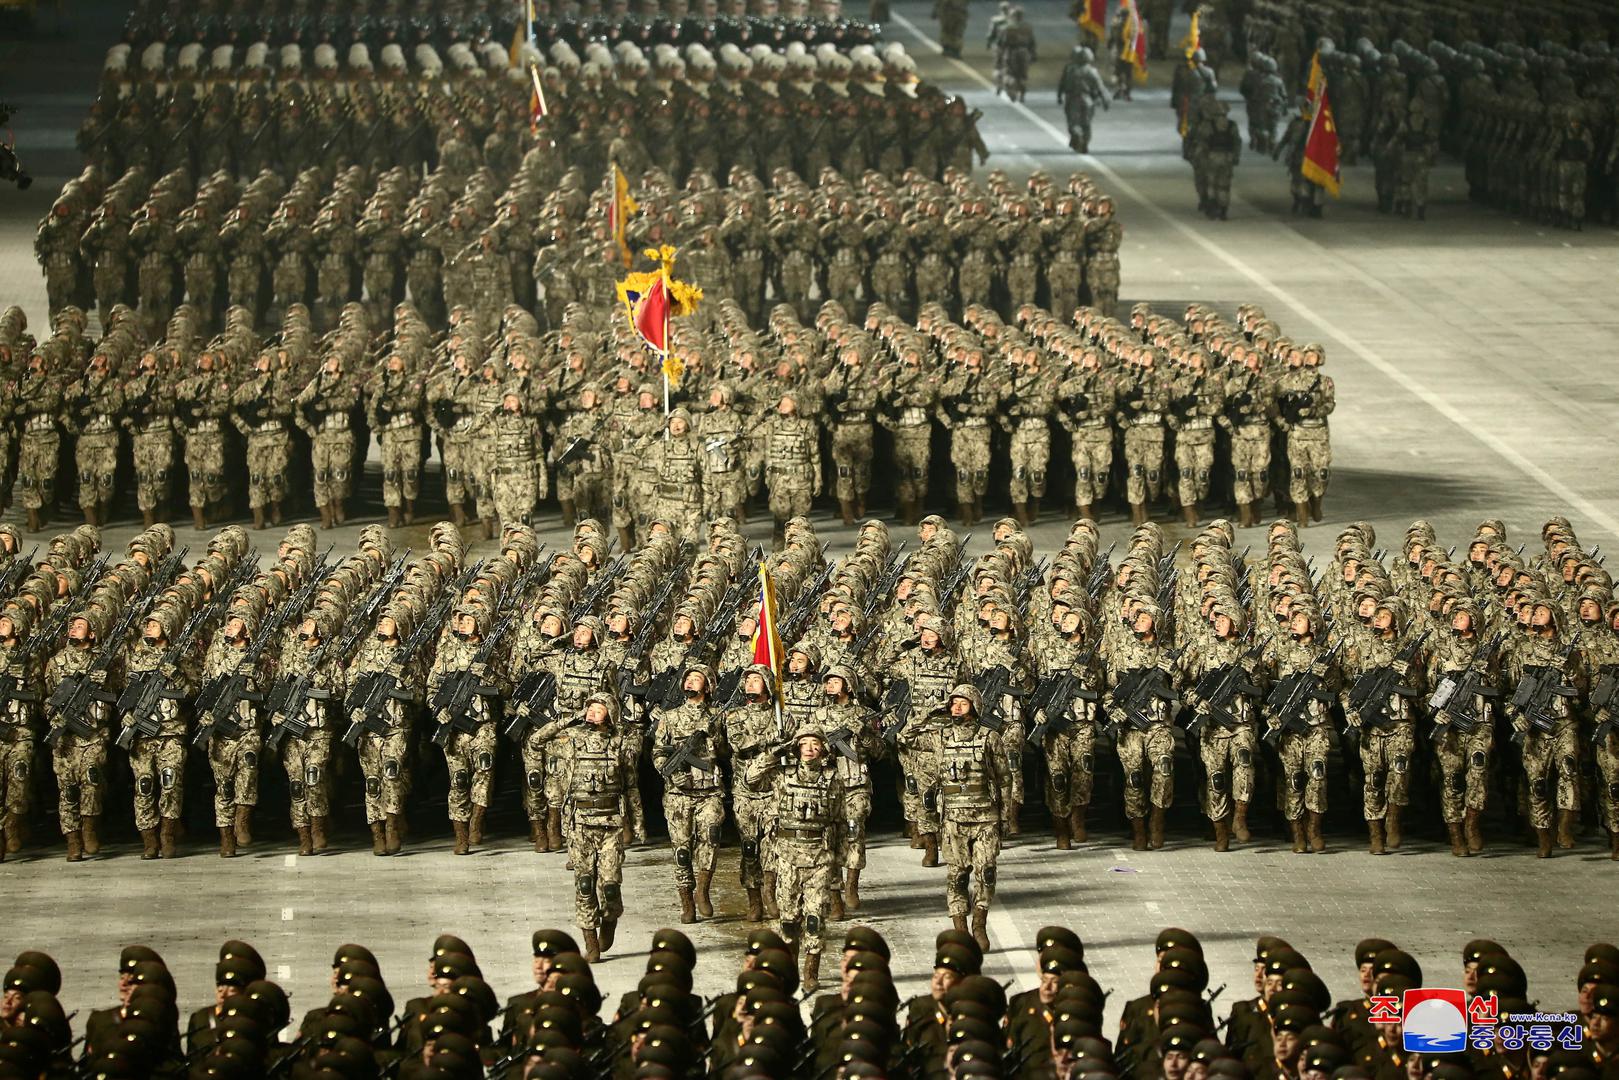 8th Congress of the Workers' Party in Pyongyang Troops march during a military parade to commemorate the 8th Congress of the Workers' Party in Pyongyang, North Korea January 14, 2021 in this photo supplied by North Korea's Central News Agency (KCNA).    KCNA via REUTERS    ATTENTION EDITORS - THIS IMAGE WAS PROVIDED BY A THIRD PARTY. REUTERS IS UNABLE TO INDEPENDENTLY VERIFY THIS IMAGE. NO THIRD PARTY SALES. SOUTH KOREA OUT. NO COMMERCIAL OR EDITORIAL SALES IN SOUTH KOREA. REFILE - CORRECTING CAPTION DESCRIPTION KCNA